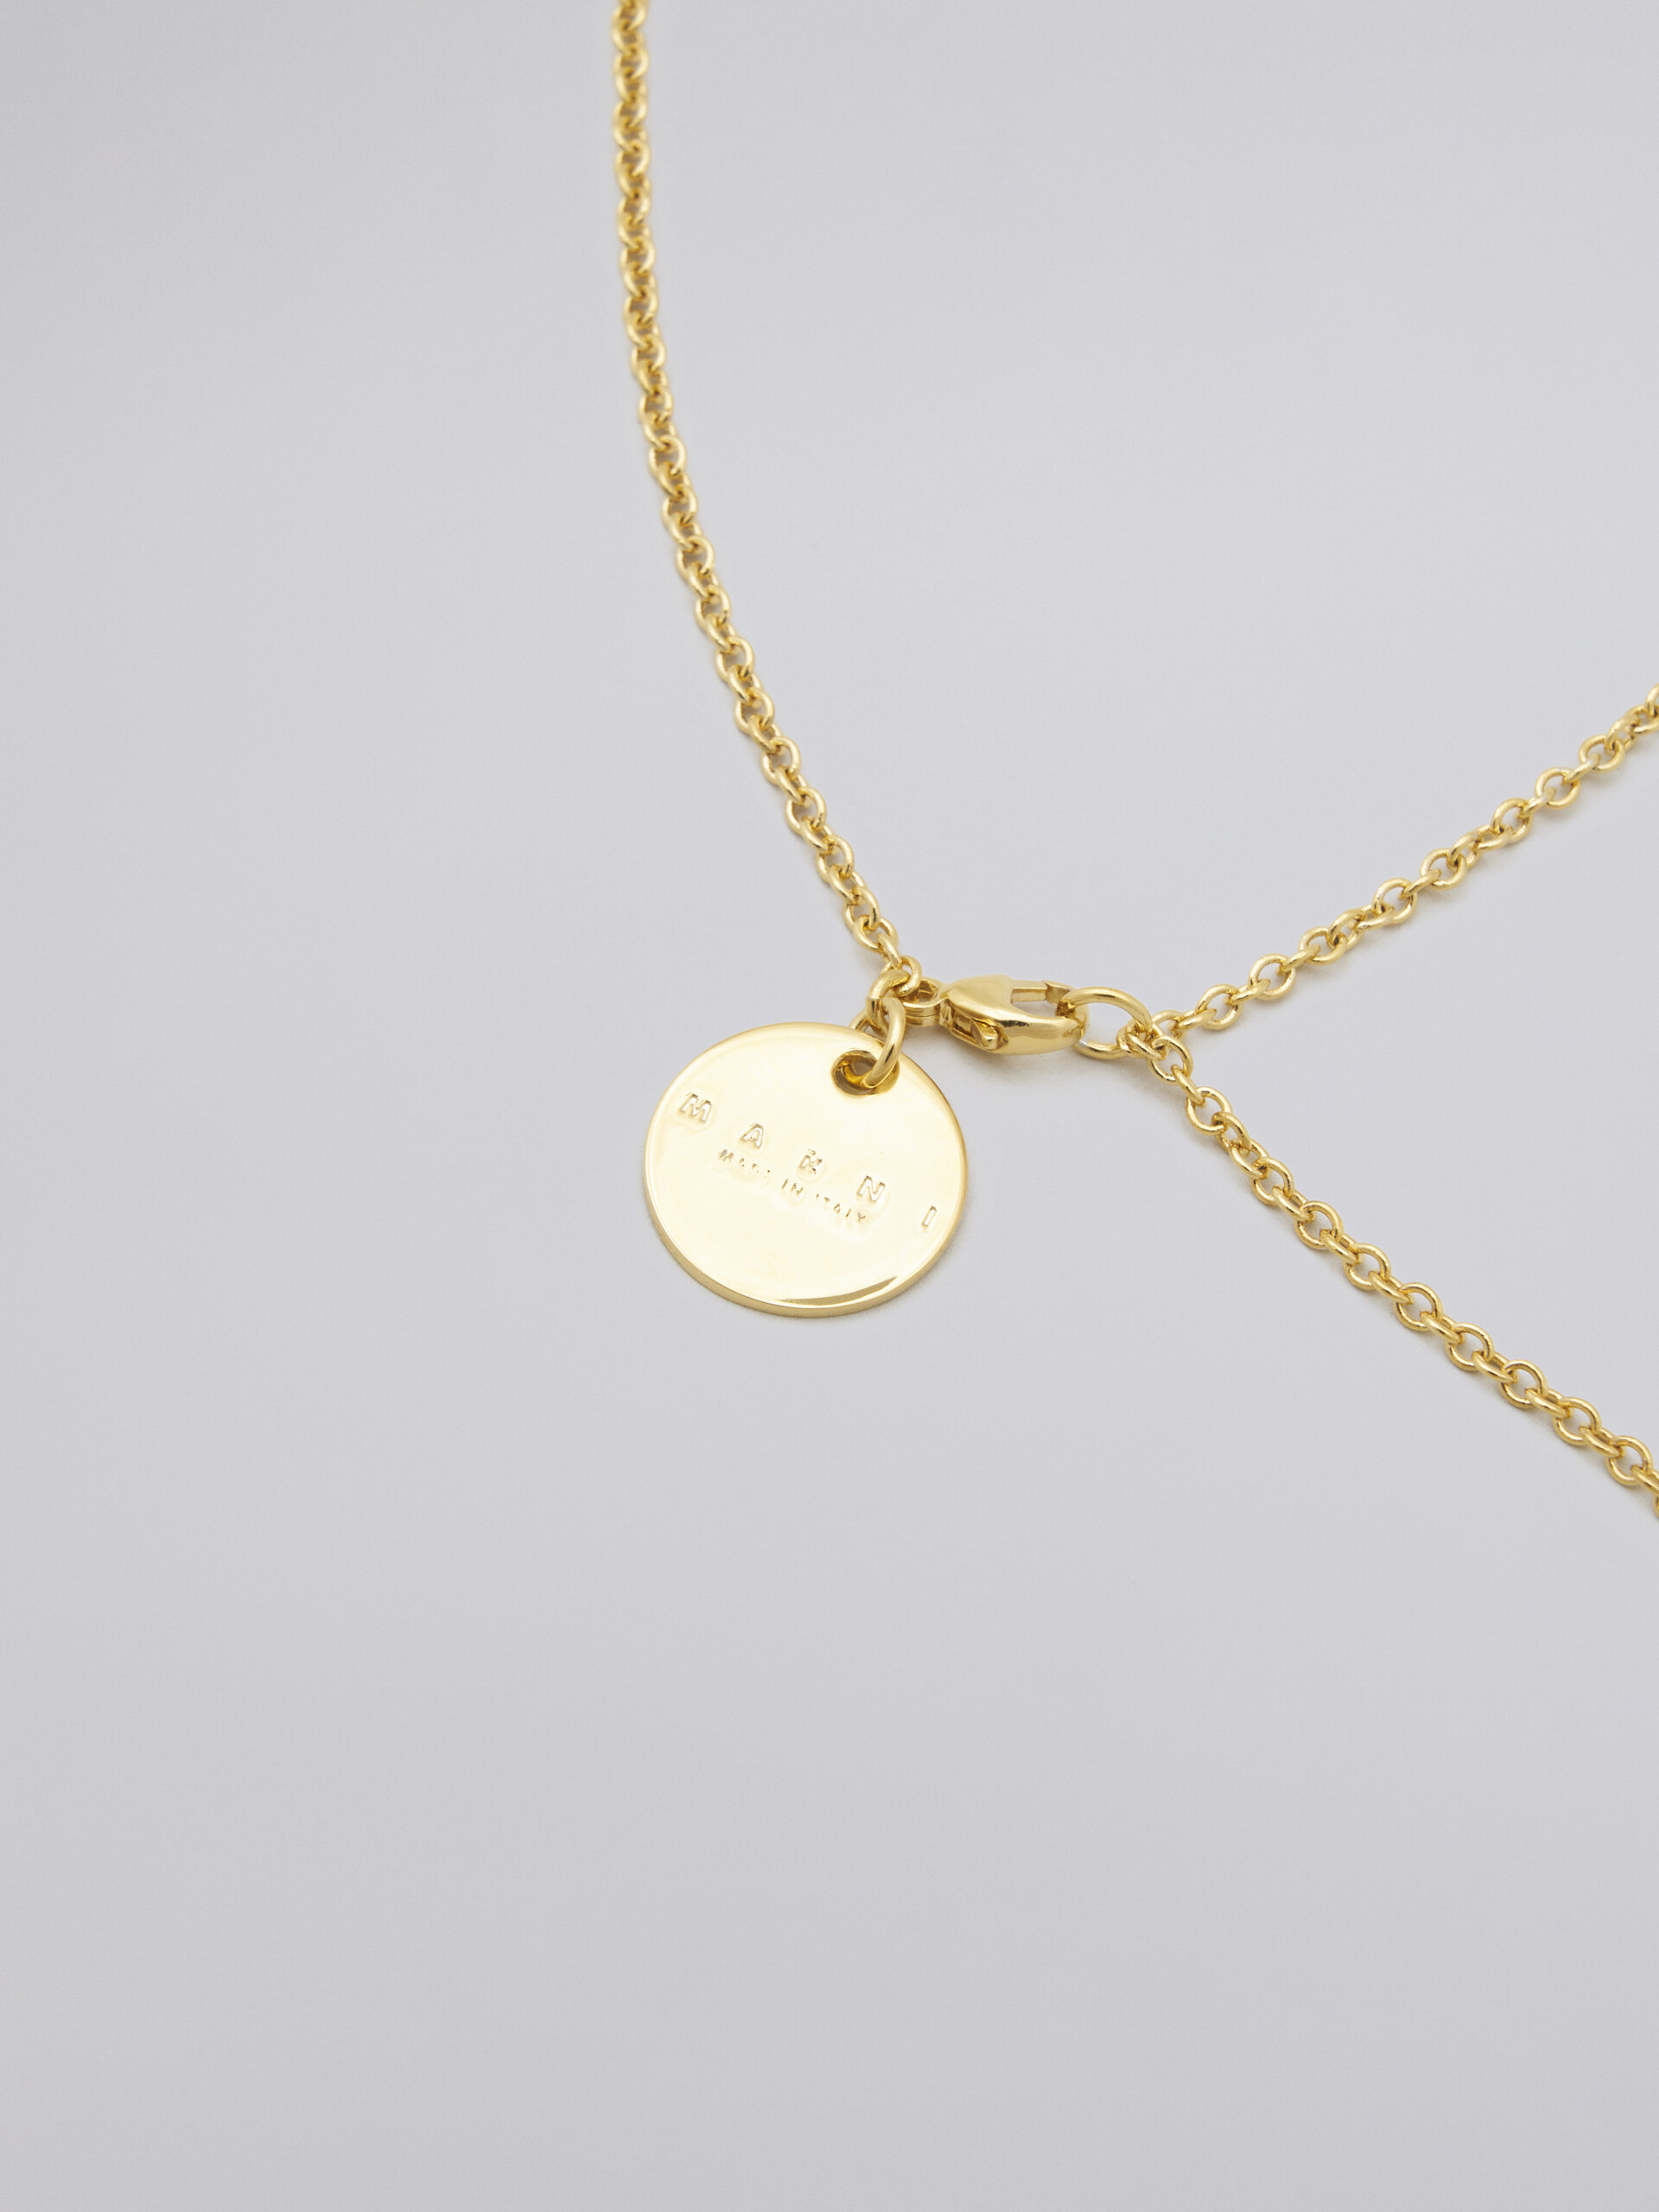 Gold-tone metal TRAPEZE necklace with transparent enamel-covered pendant - Necklaces - Image 3